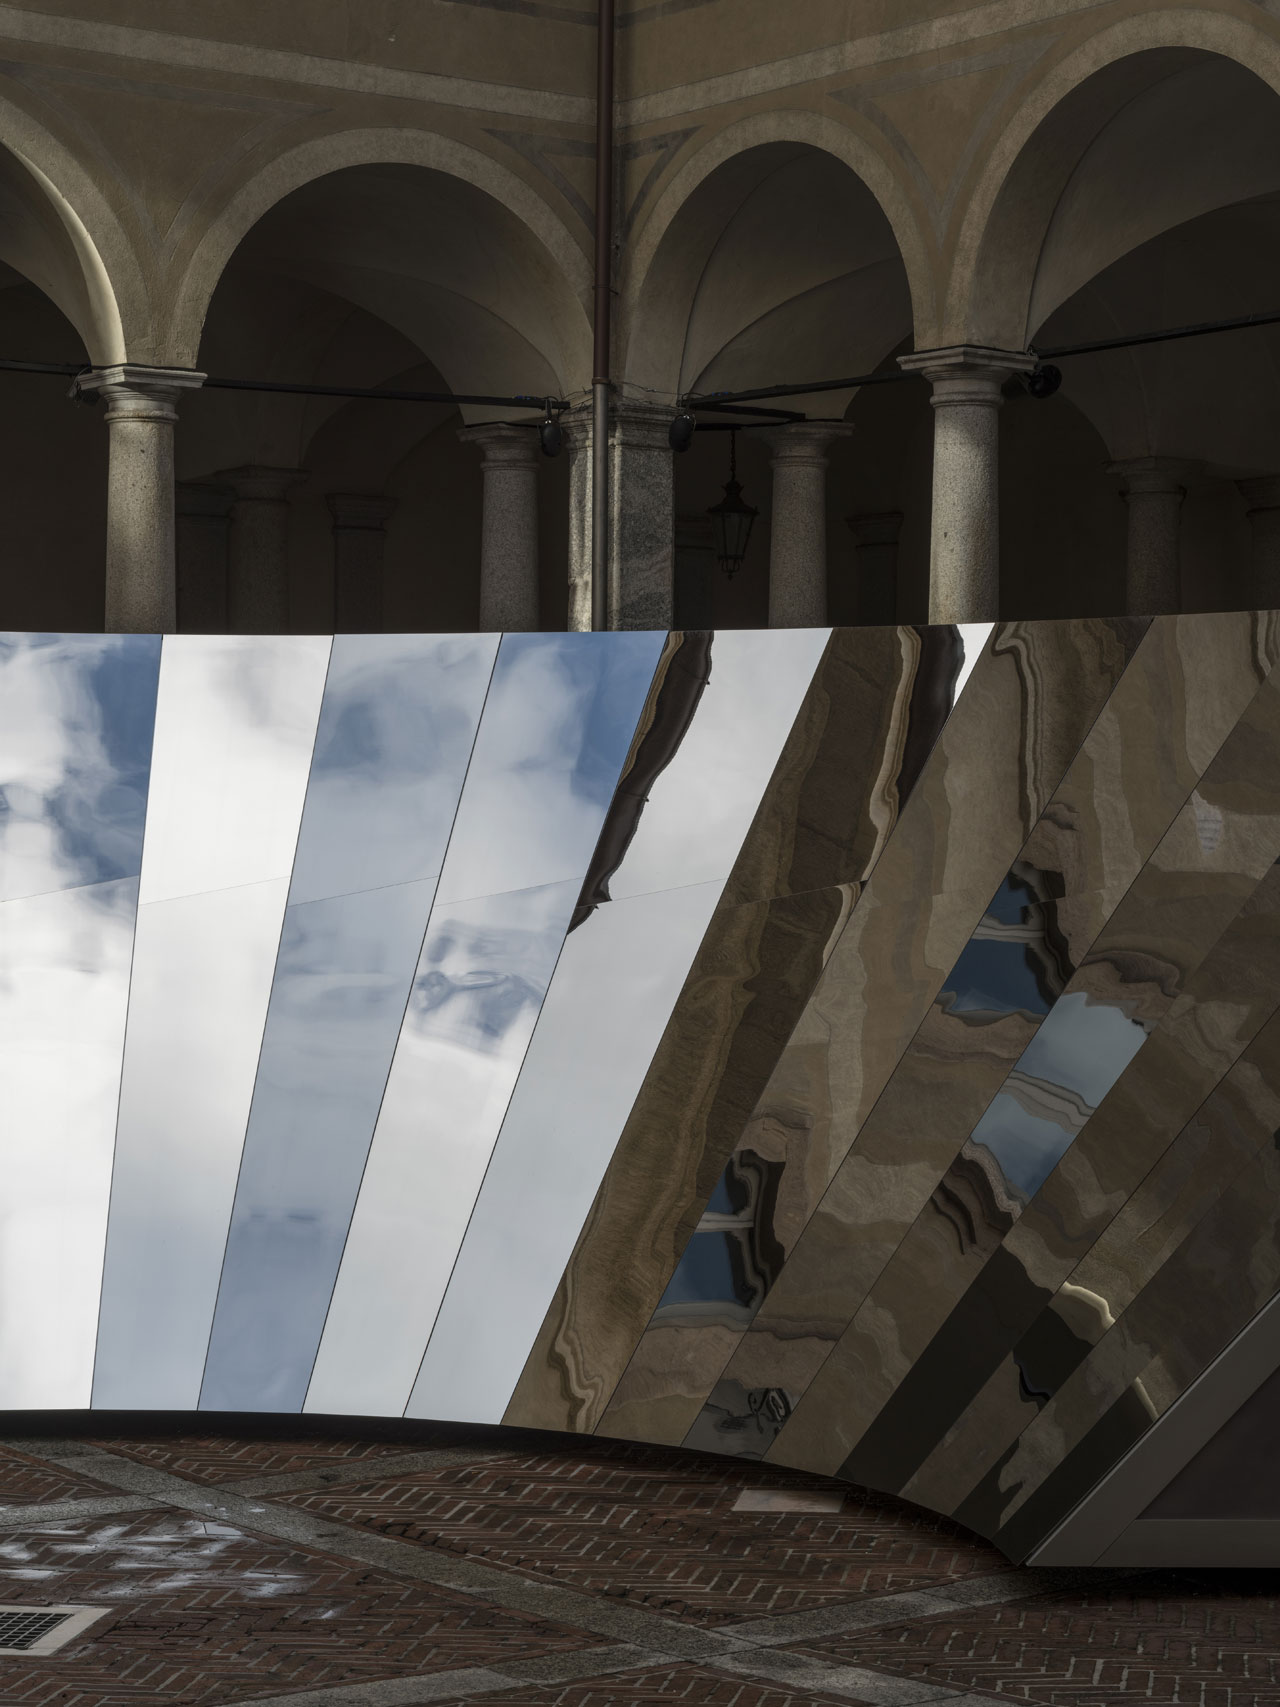 OPEN SKY installation by Phillip K. Smith III for COS at Palazzo Isimbardi.Photo by Lance Gerber.